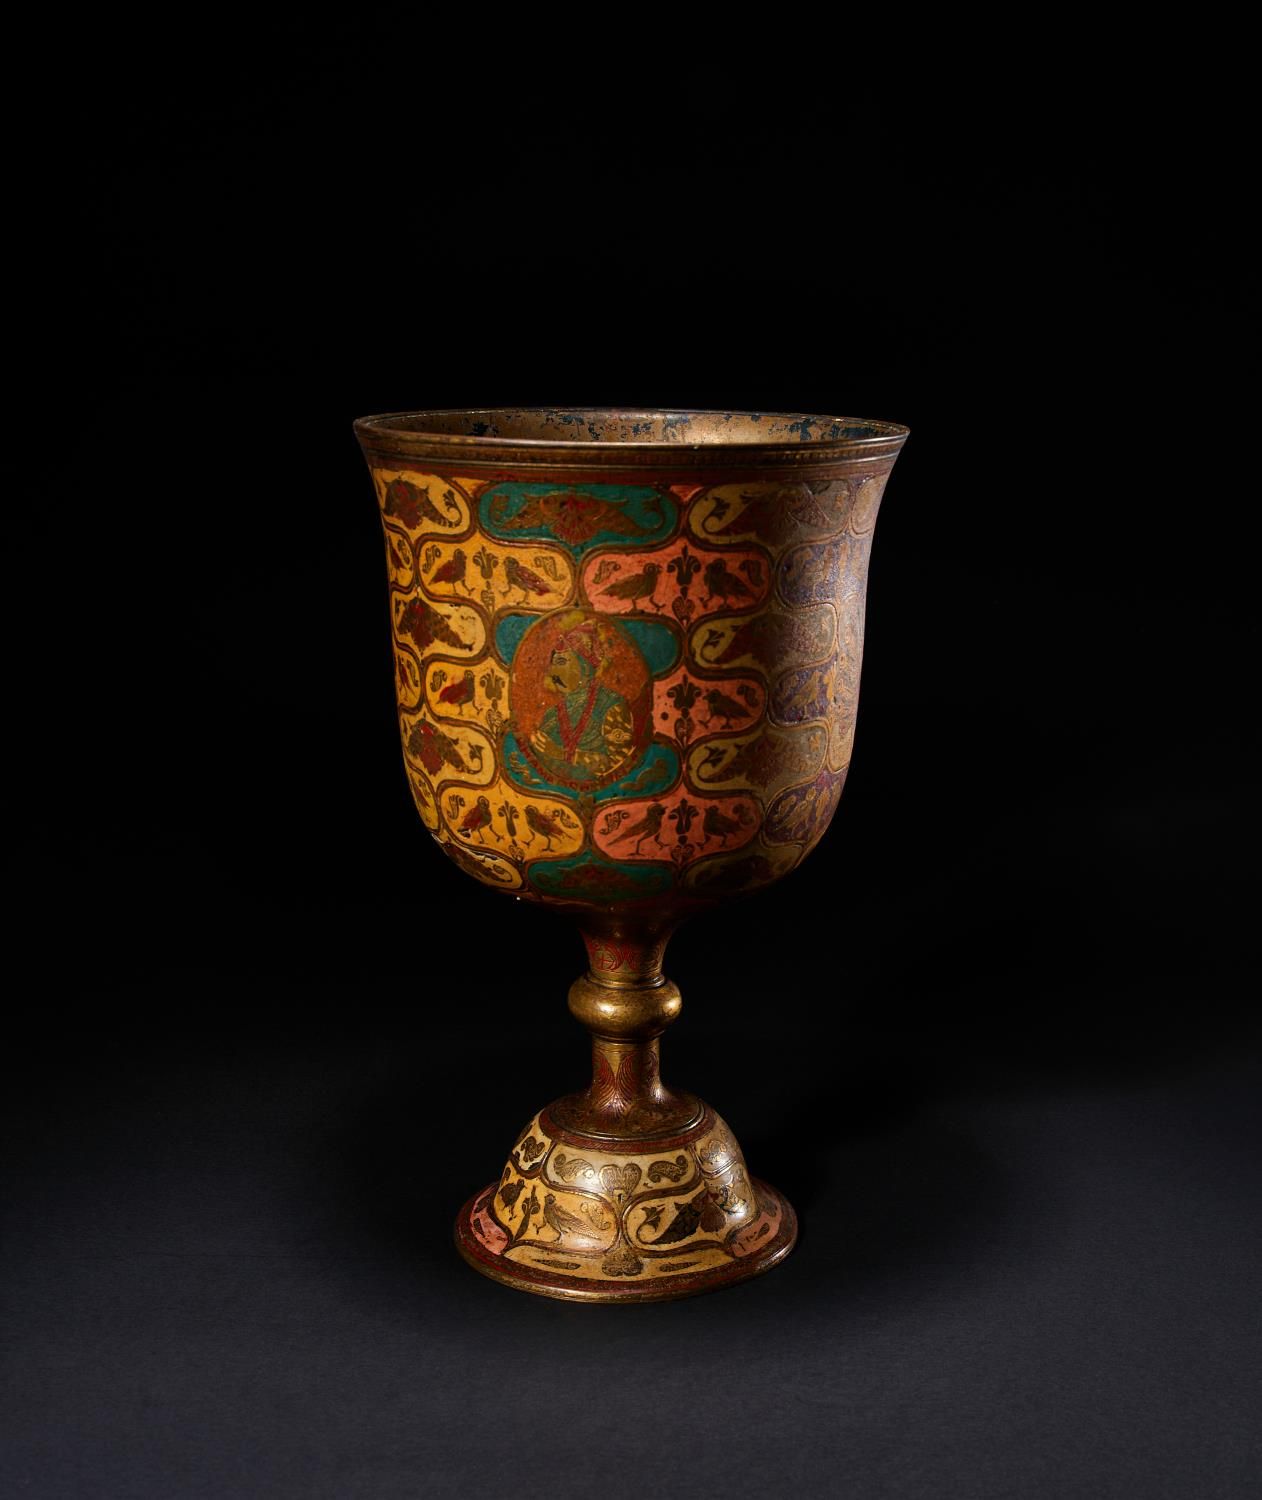 AN INDIAN BRONZE & ENAMEL CHALICE DEPICTING MUHAMMAD SHAH DATED 1719, 18TH CENTU&hellip;